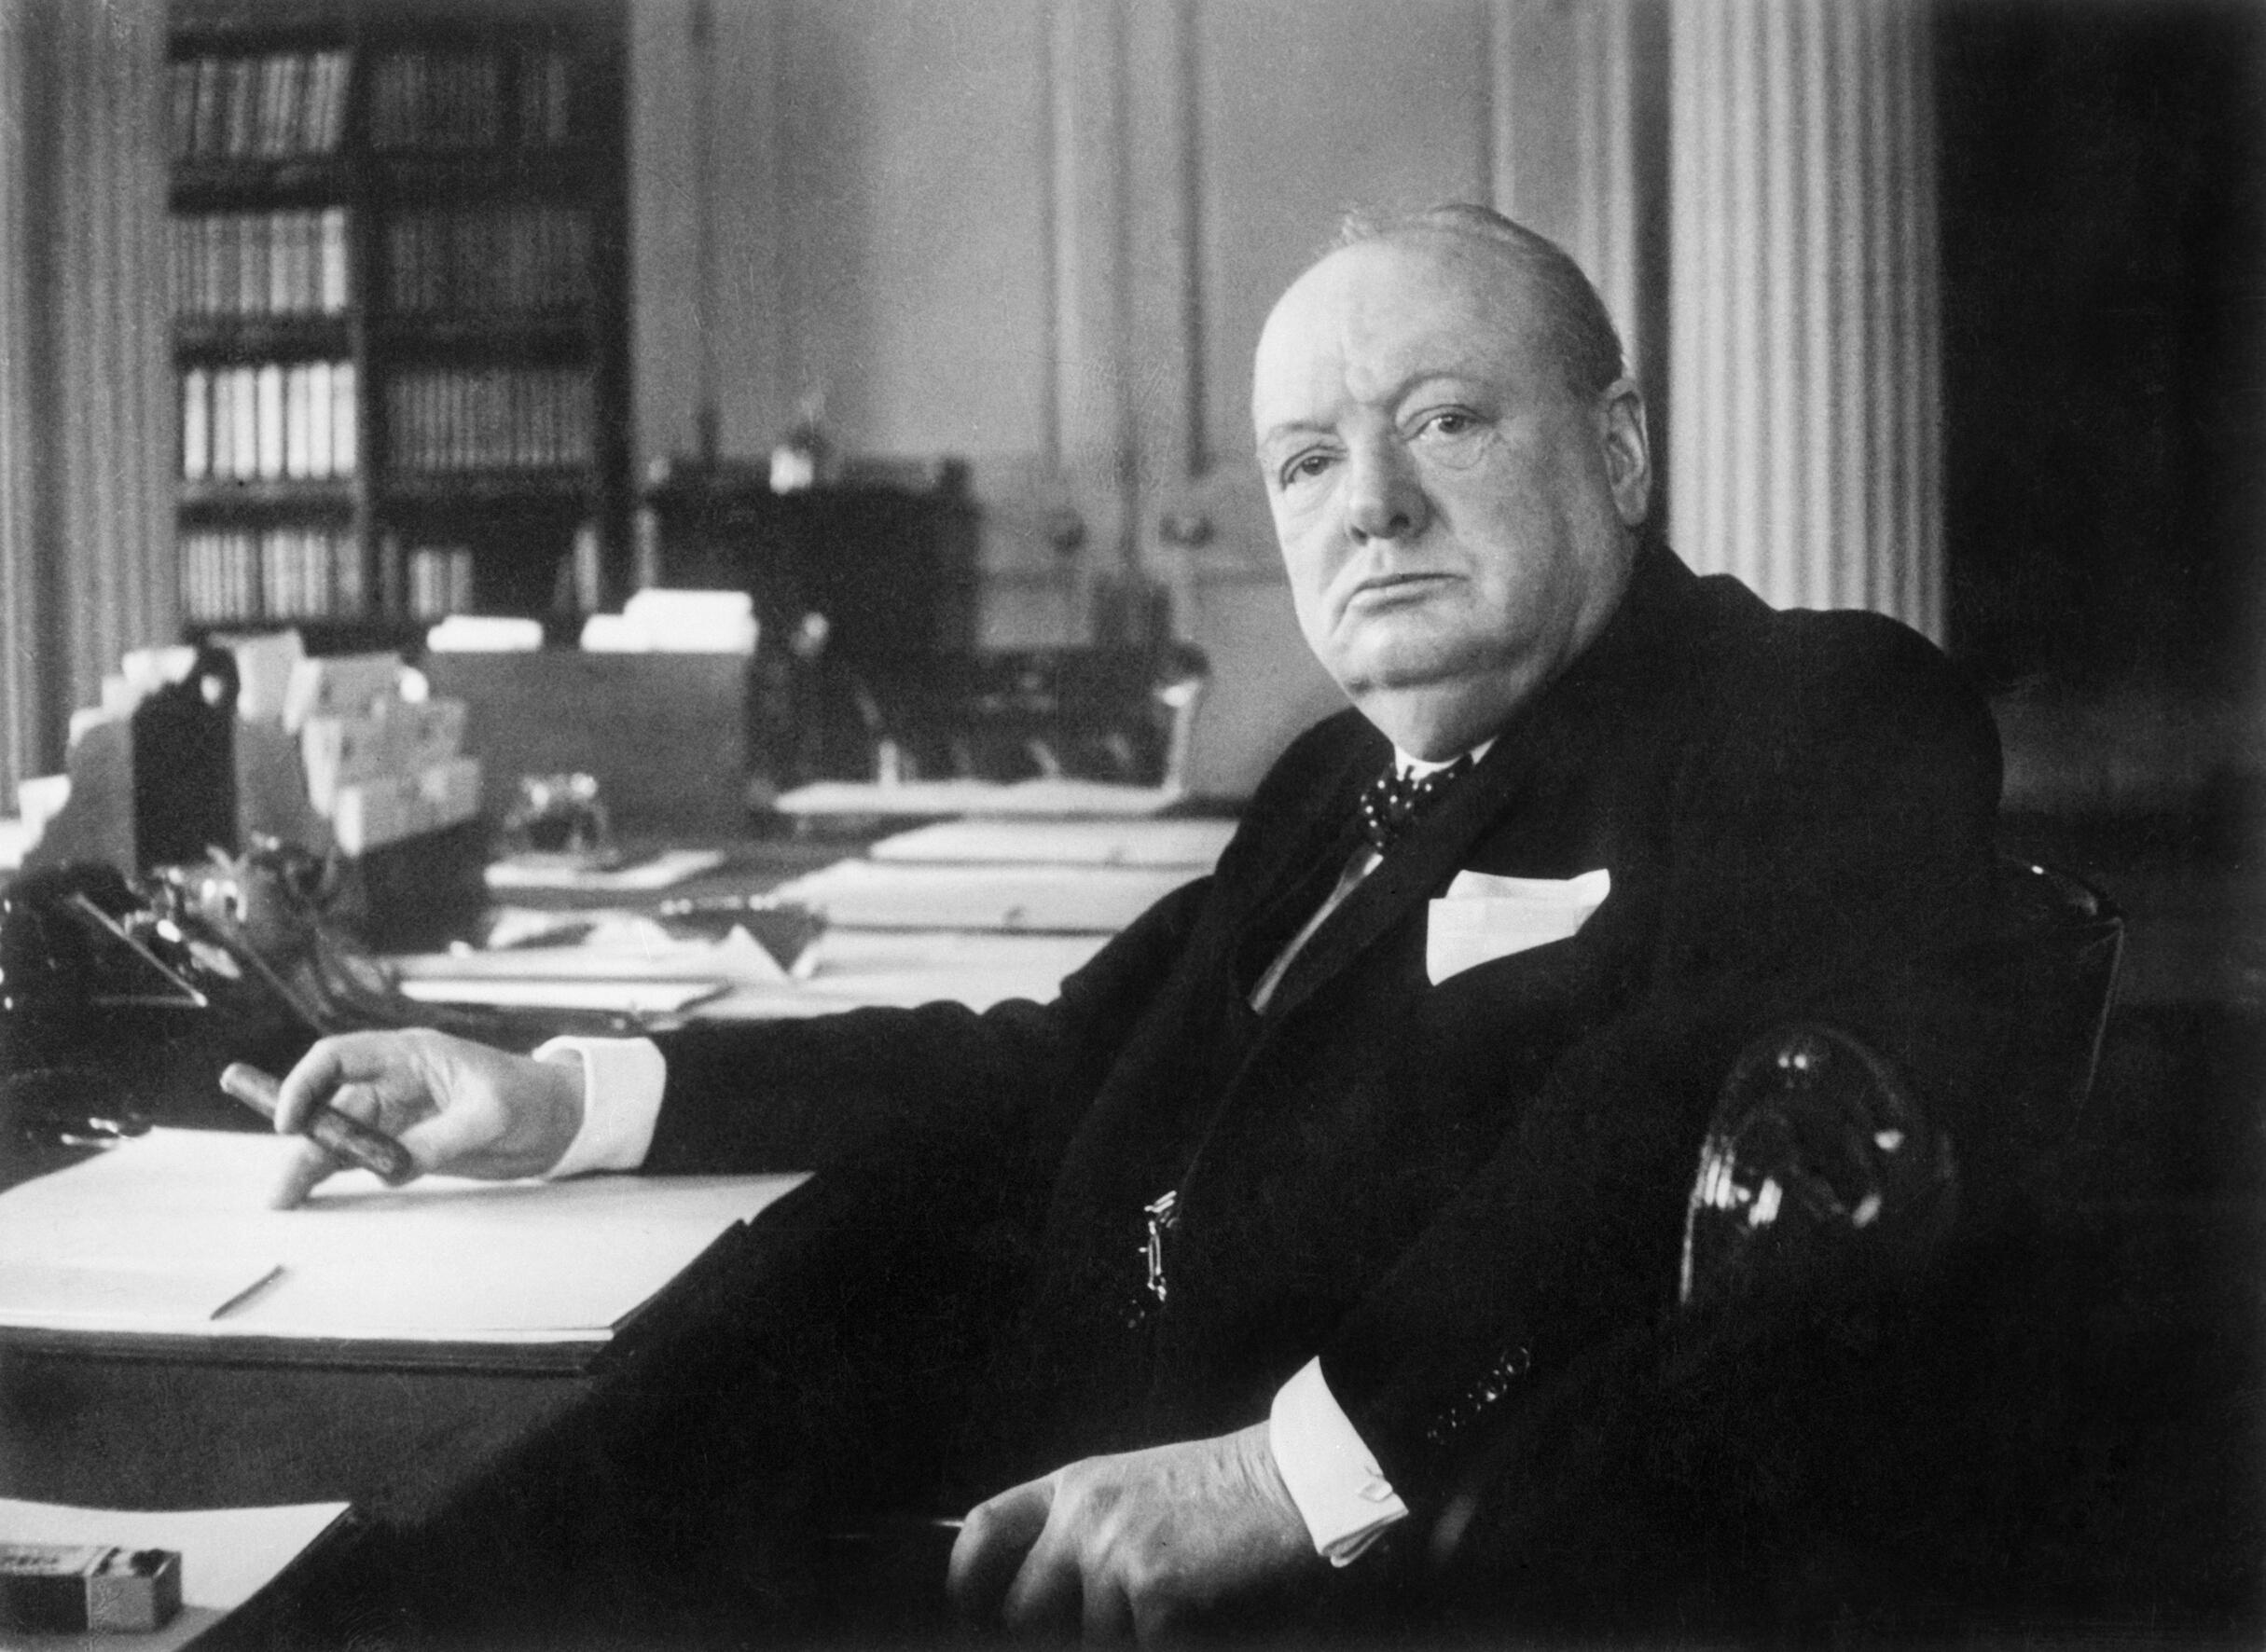 Churchill demonstrated how to lead through uncertainty